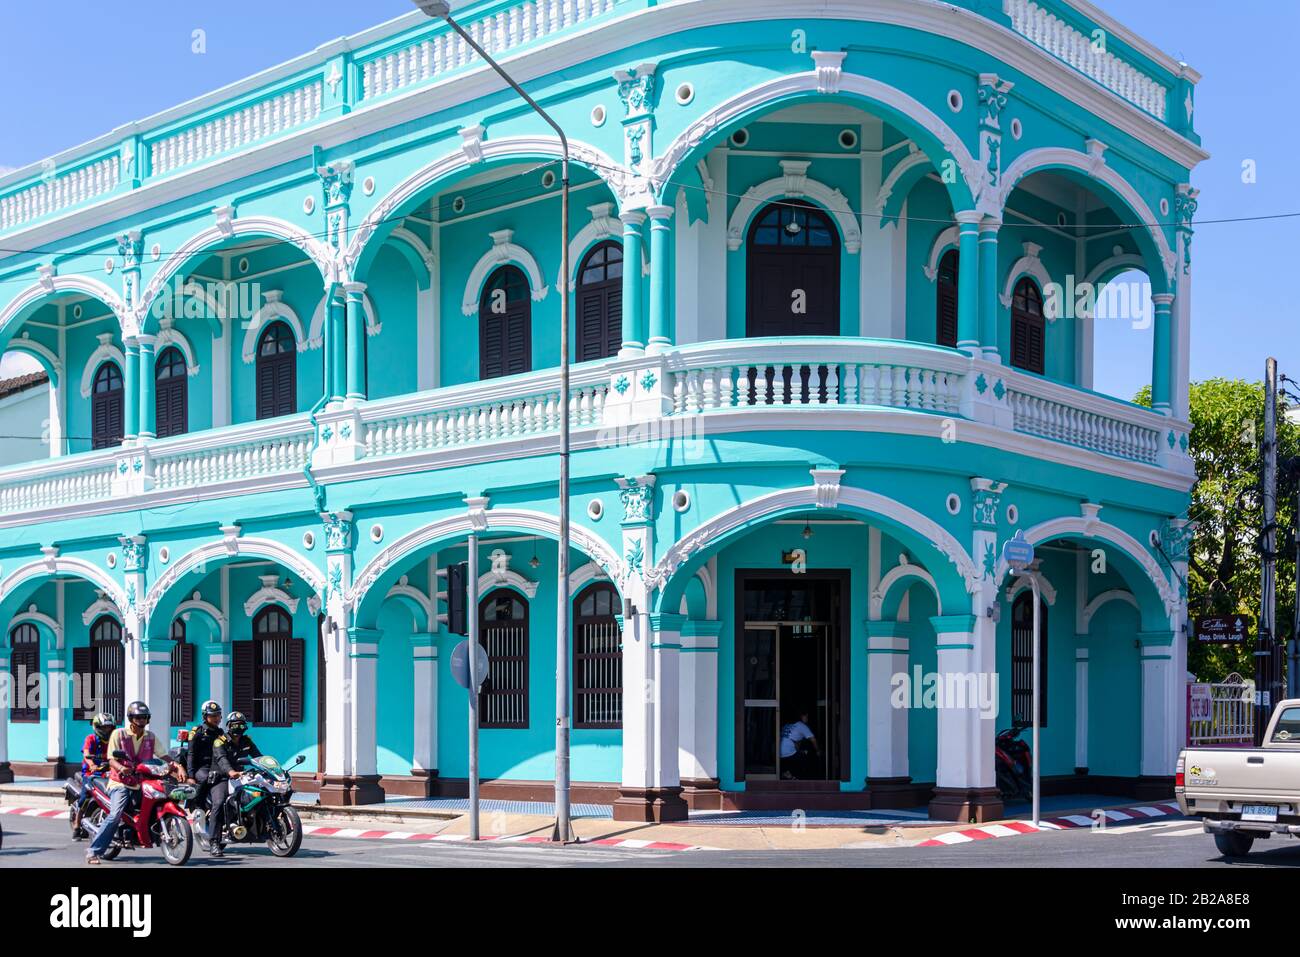 Sino-Portuguese architecture building in Phuket Old Town, Thailand. Stock Photo